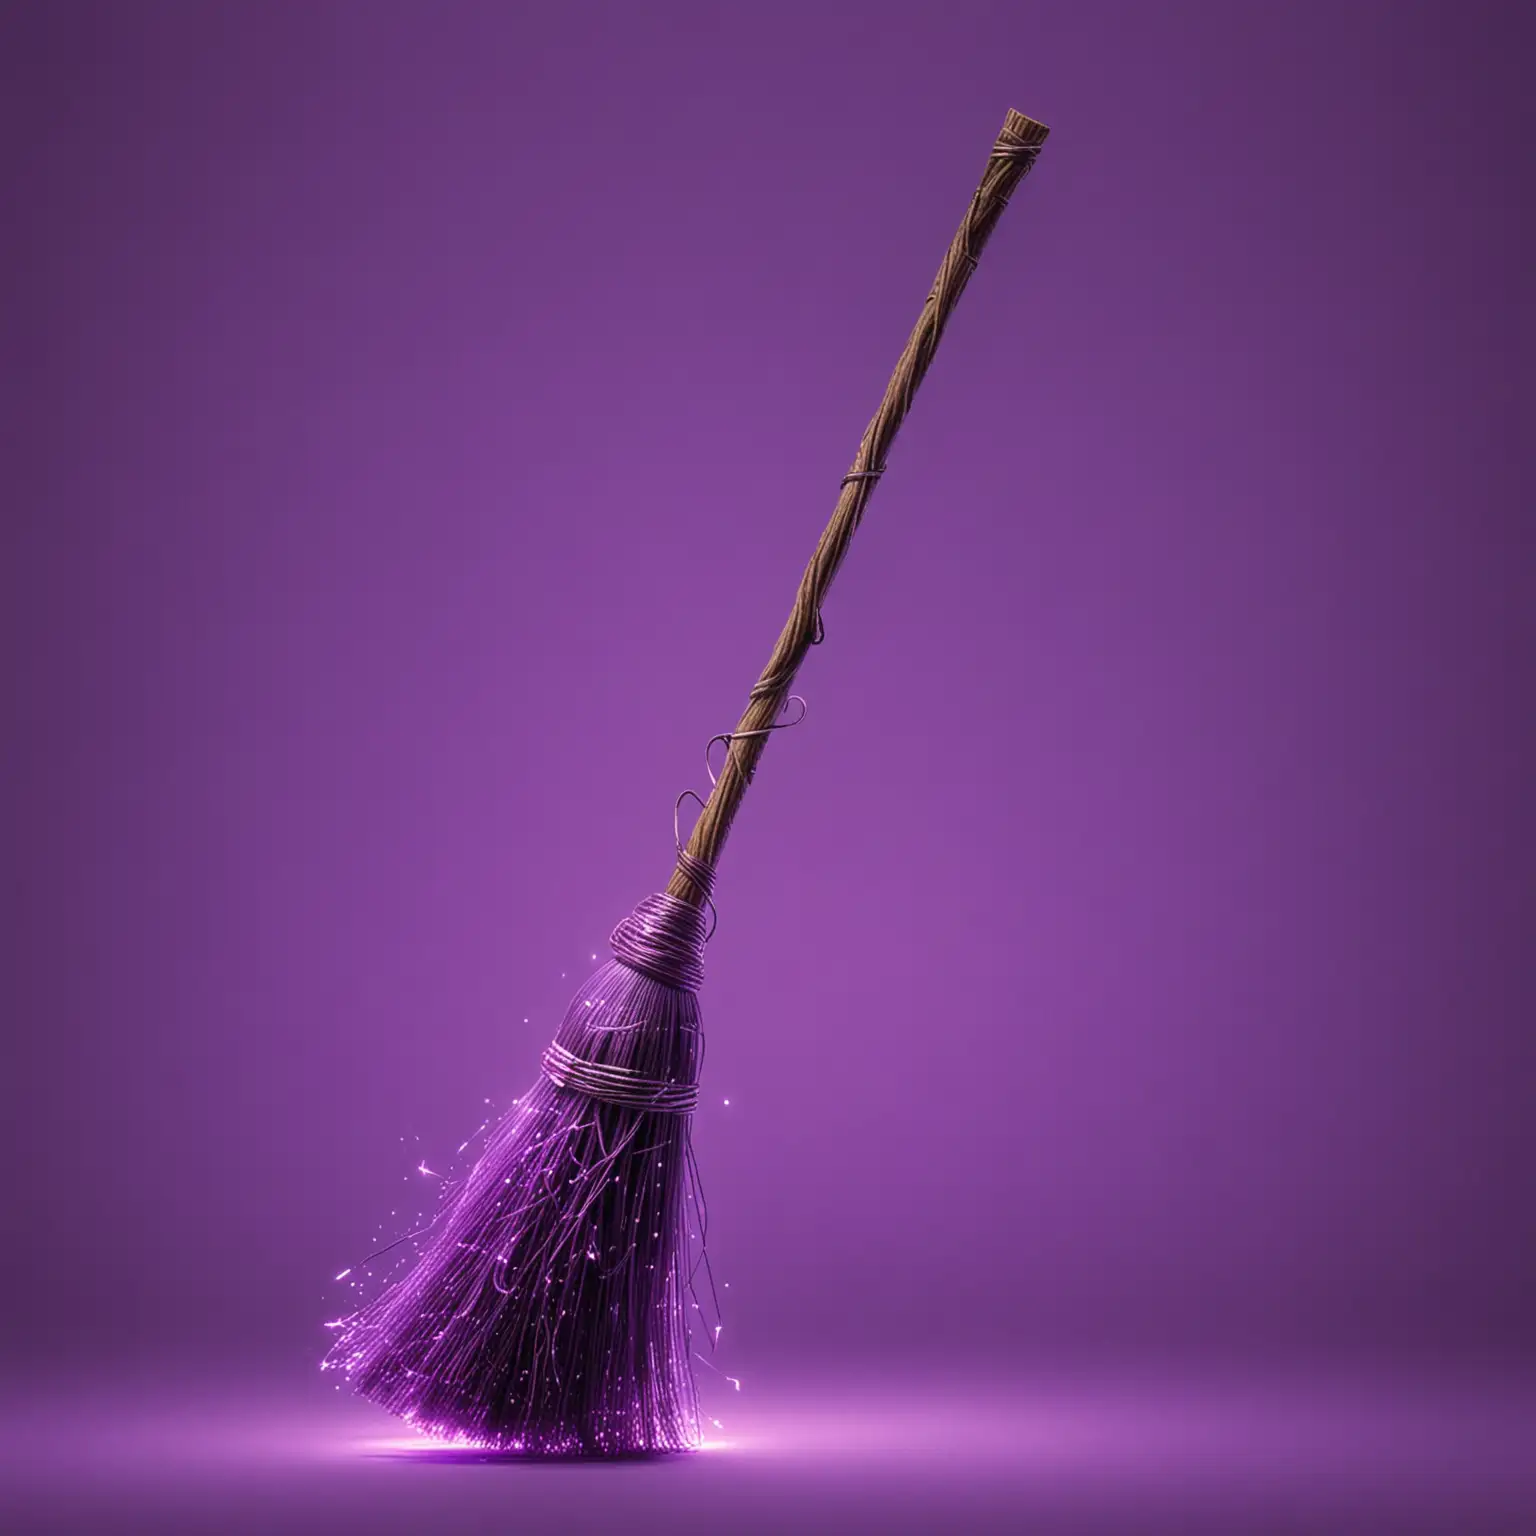 Realistic Broom Hovering with Neon Purple Lighting